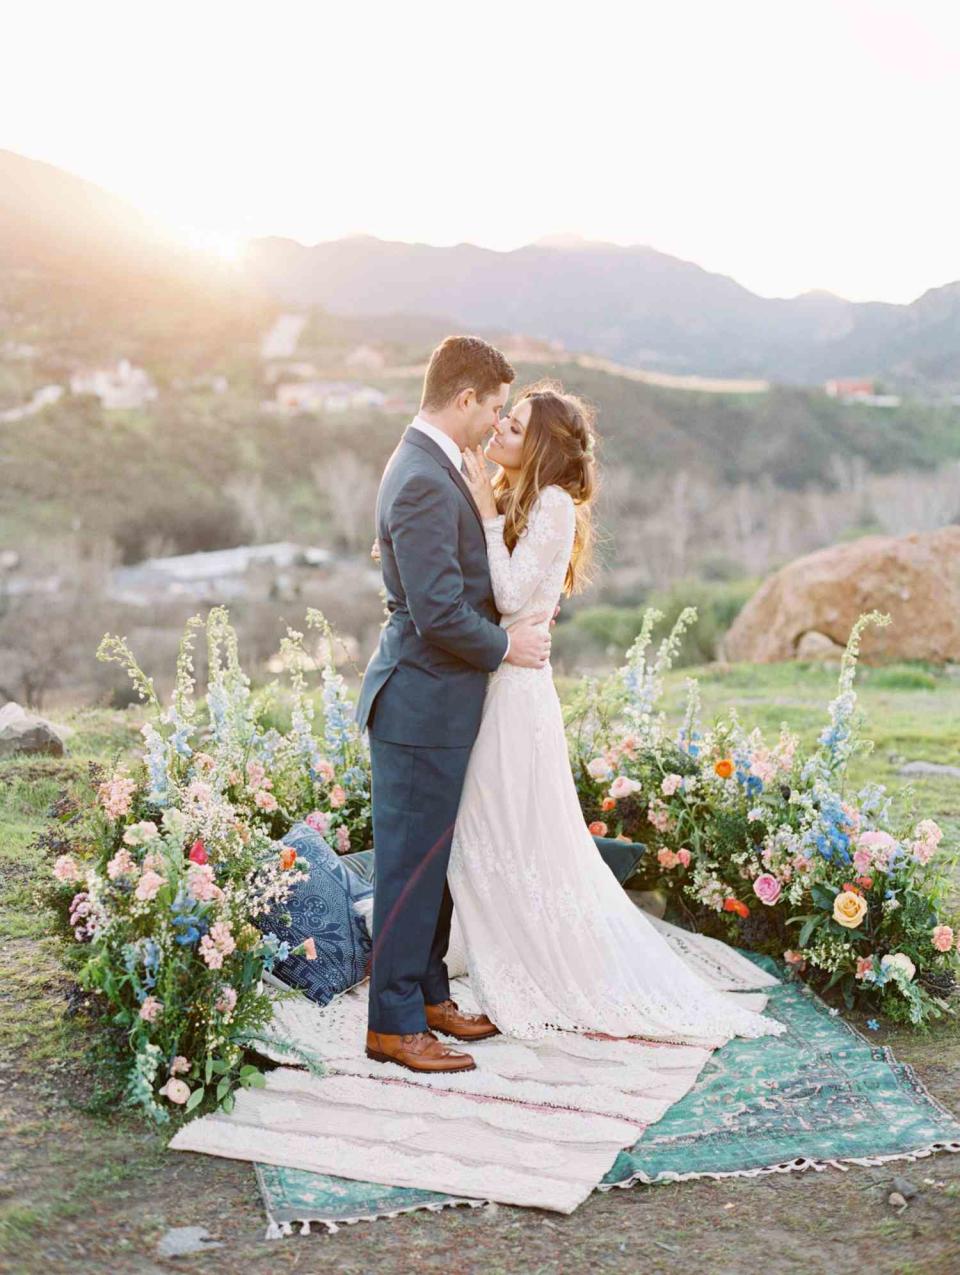 A Bohemian Wedding Trend We're Loving: Ceremony Aisles with Rugs